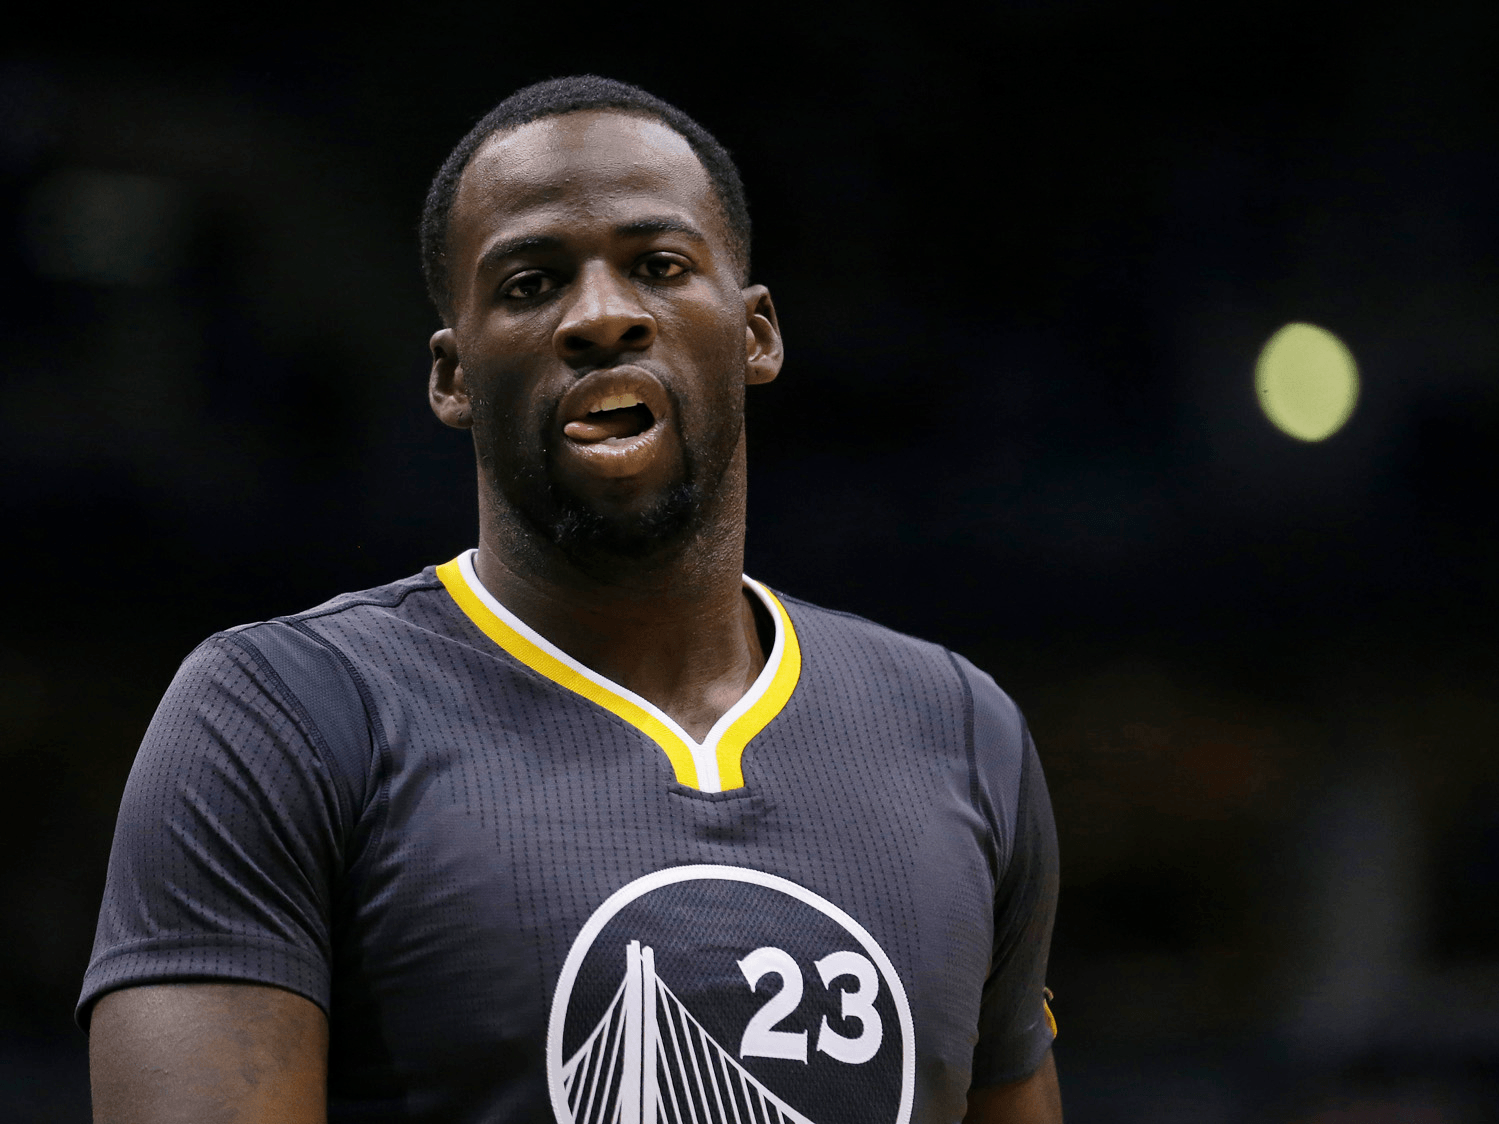 Draymond Green is at war with the NBA after kicking players